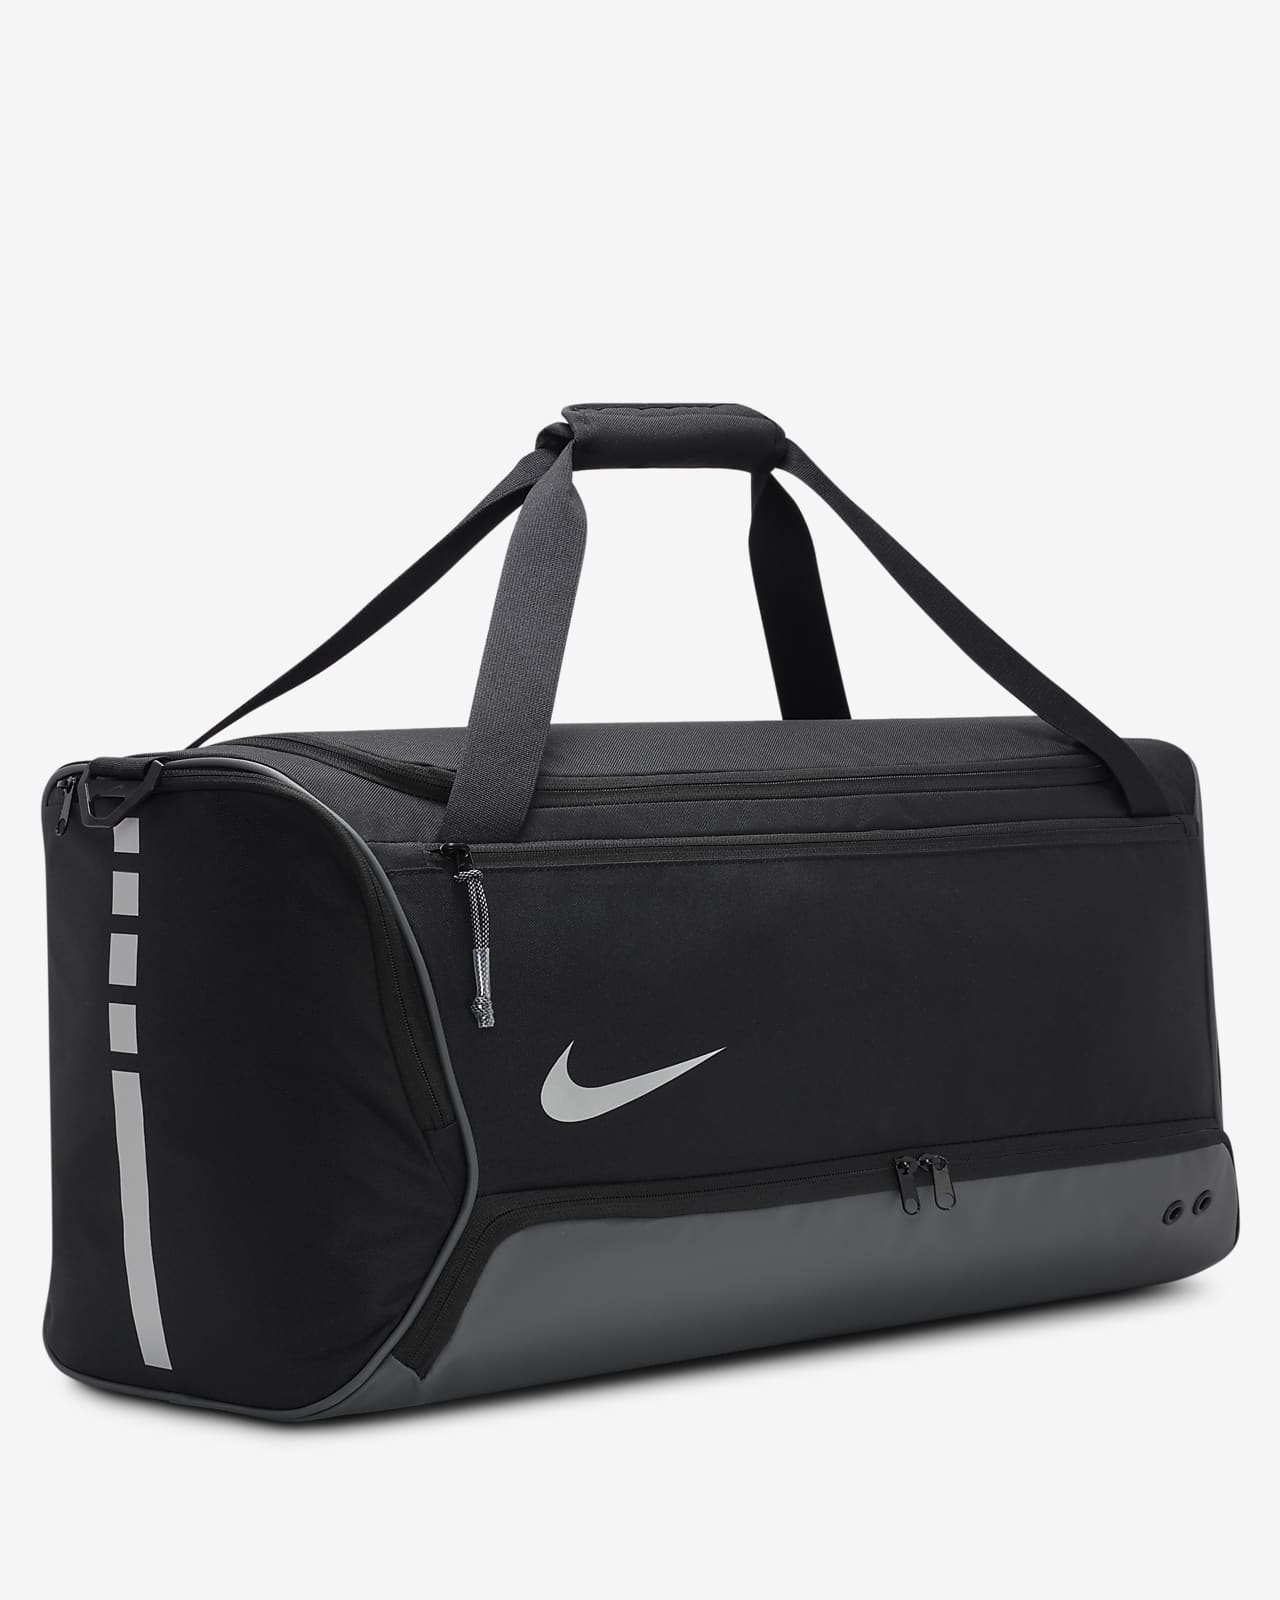 Daydreams Duffle Bag - Wink Accessories